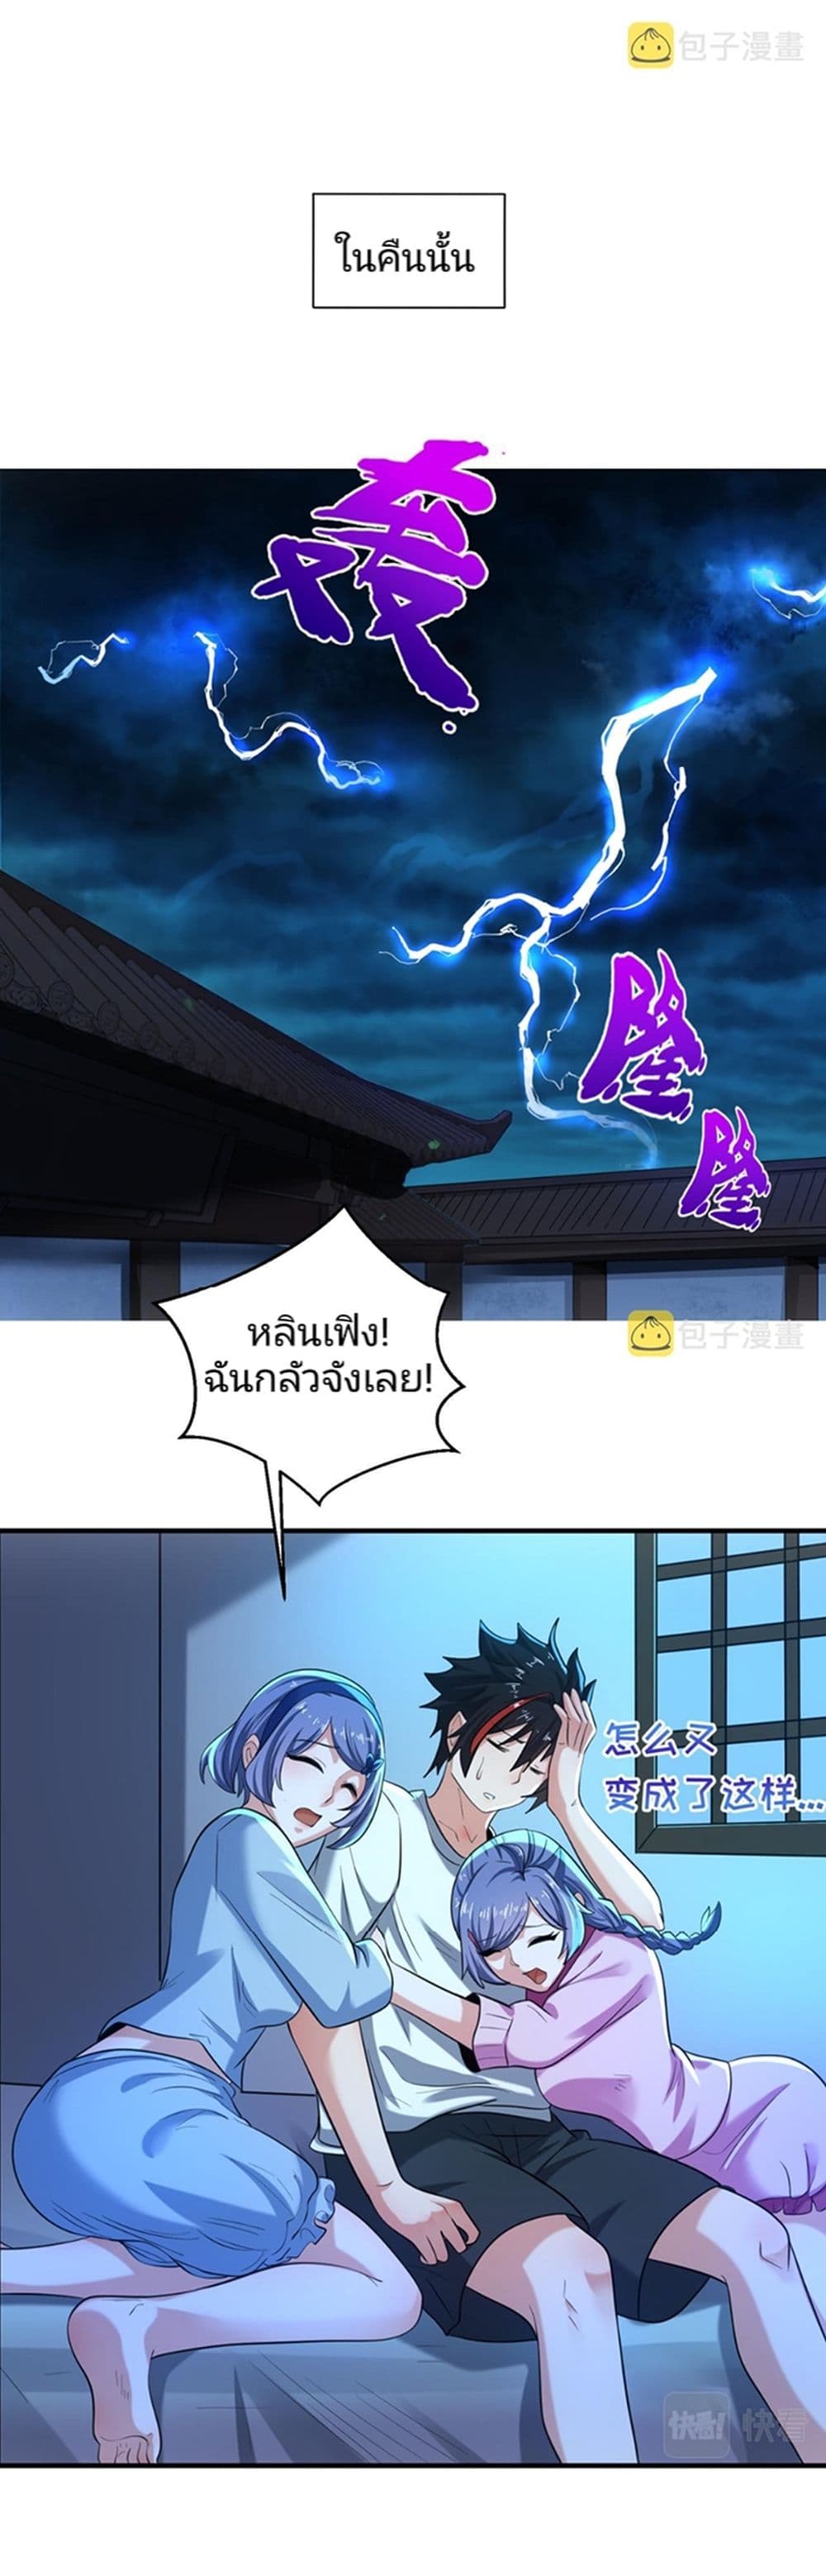 The Age of Ghost Spirits à¸à¸­à¸à¸à¸µà¹ 47 (25)